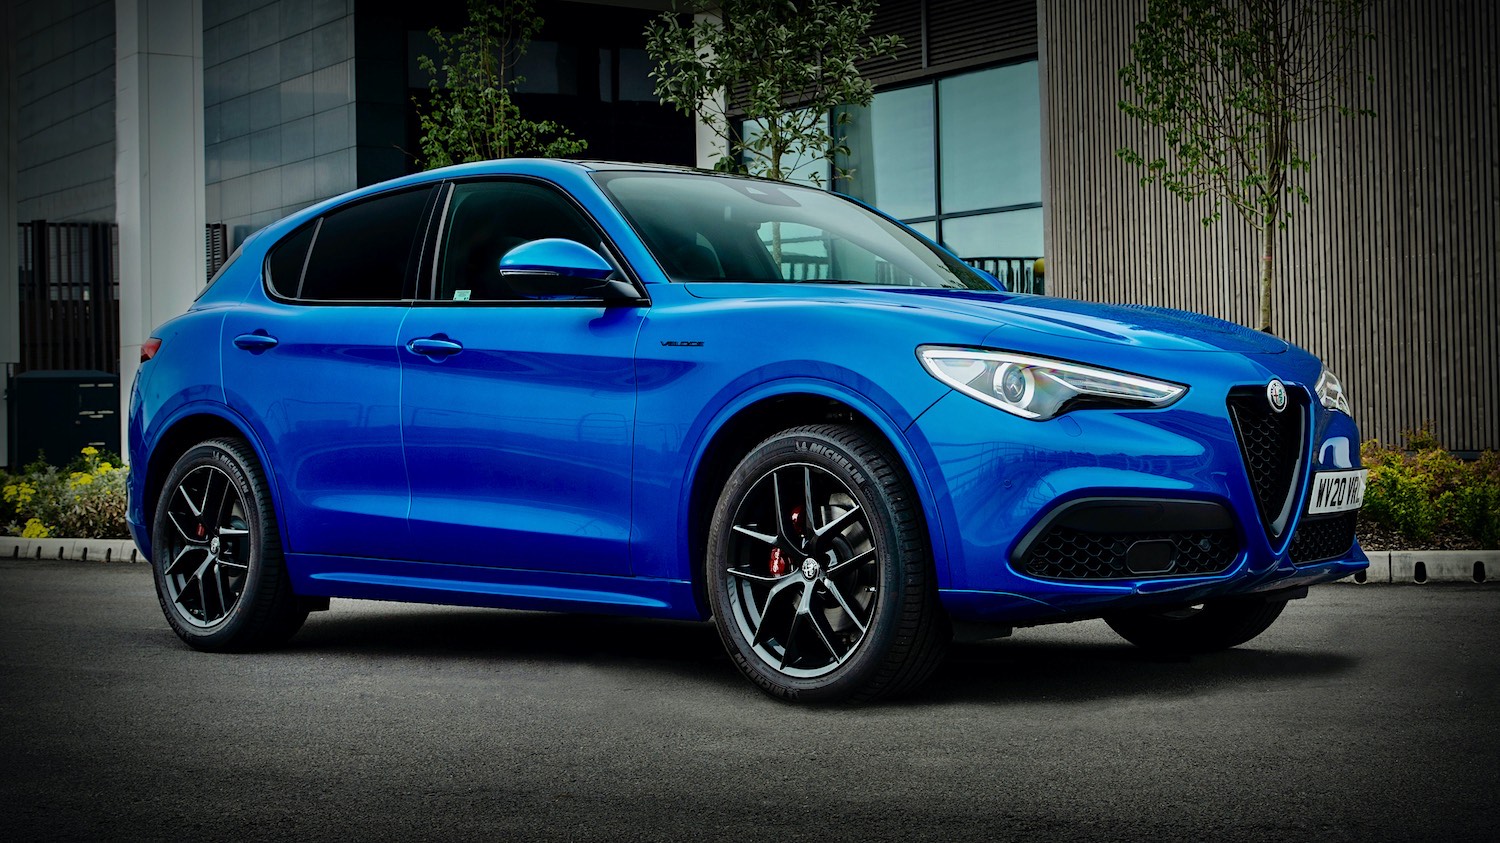 Drive.co.uk - Car Reviews - Alfa Romeo Stelvio Veloce, not just another one